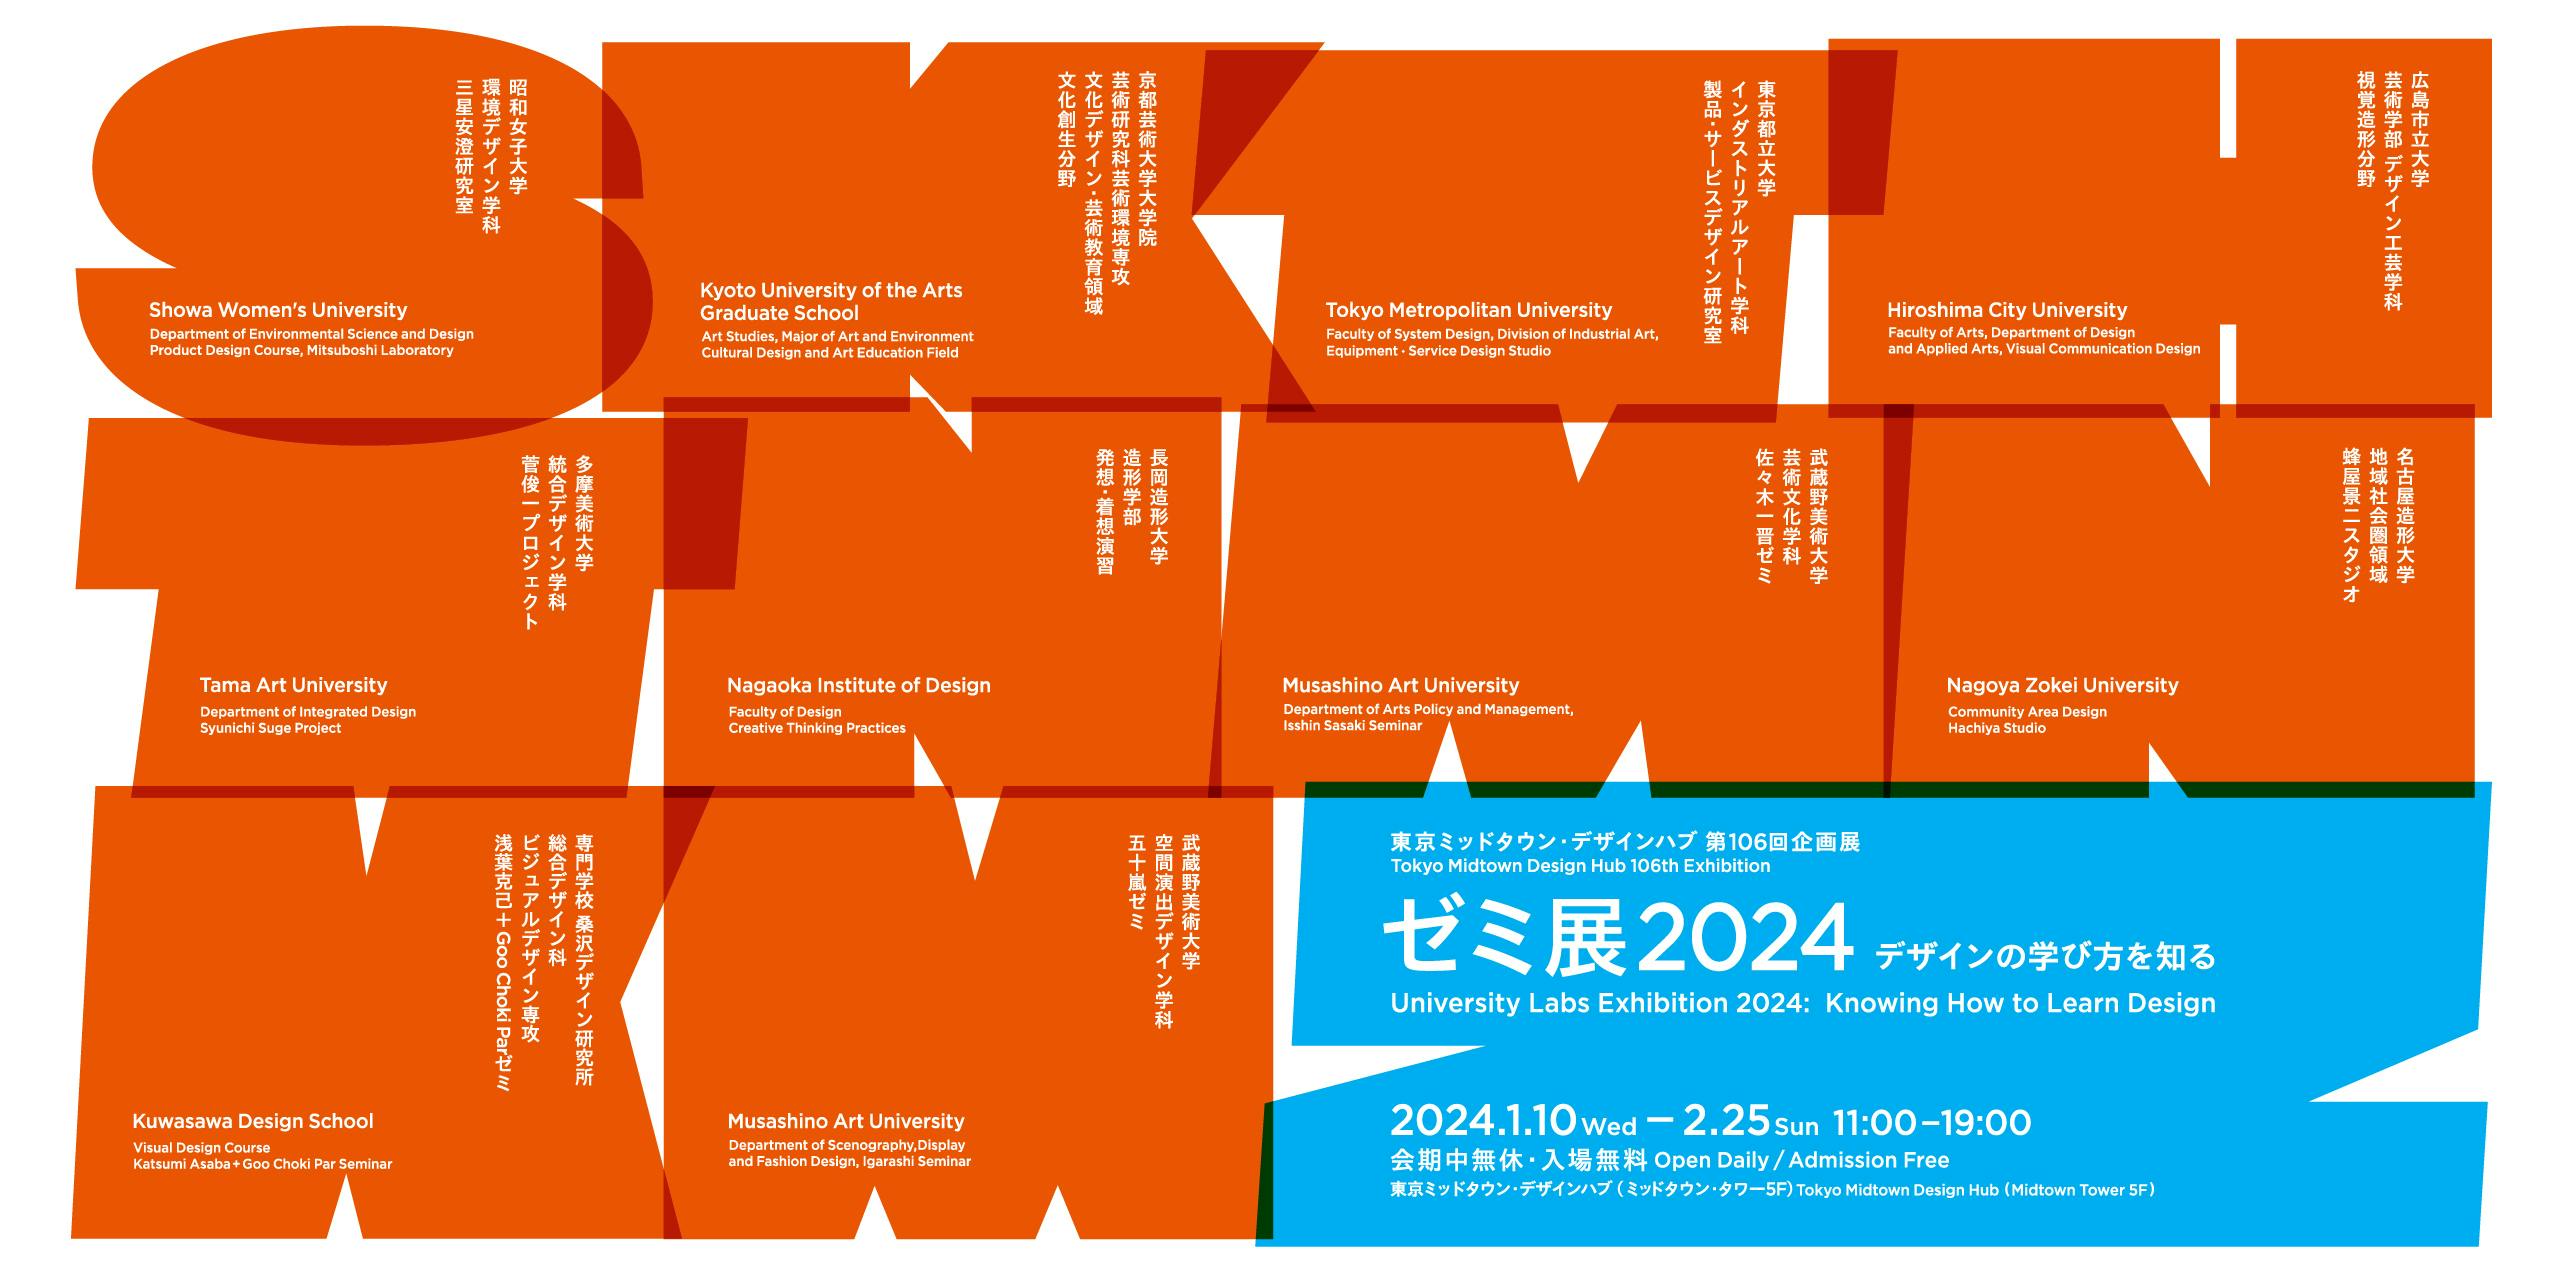 University Labs Exhibition 2024: Knowing How to Learn Design